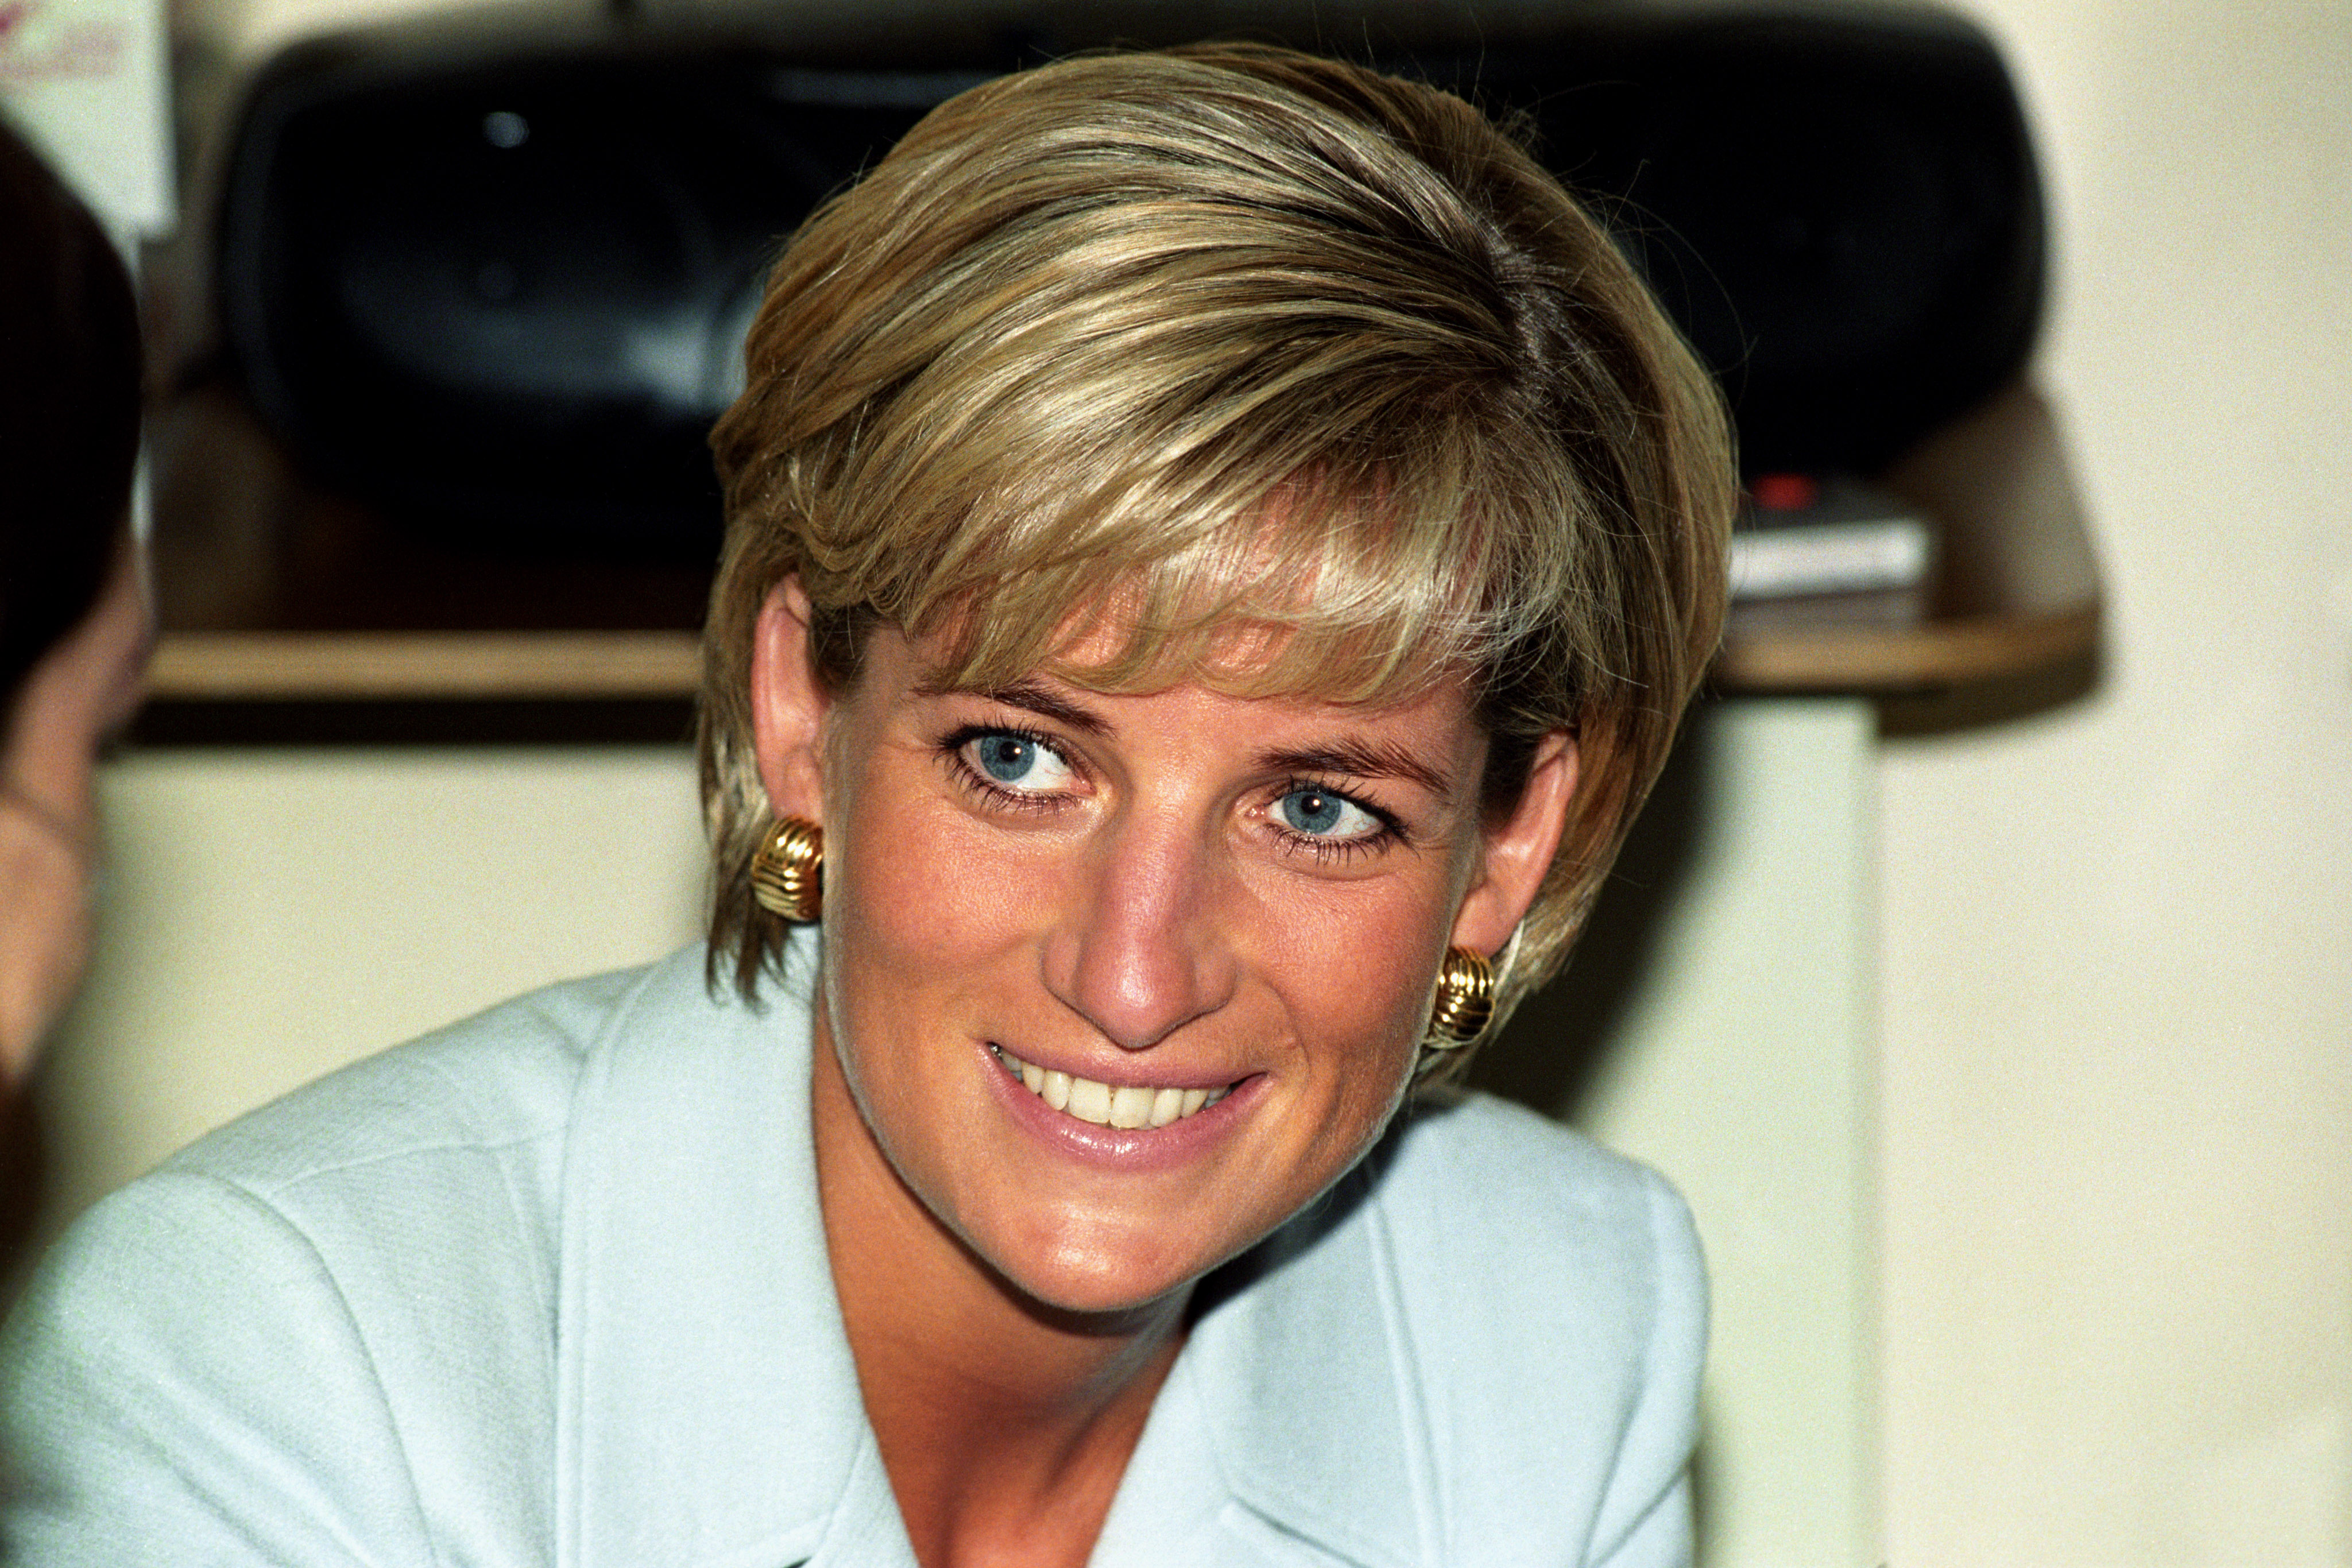 Diana, Princess of Wales, at the Royal Brompton Hospital where she visited Cystic Fibrosis patients.   31/8/97 The Princess was killed in a car crash in Paris along with her friend, Dodi Al Fayed, and the driver of their car.   (Photo by Neil Munns - PA Images/PA Images via Getty Images) (Neil Munns - PA Images&mdash;PA Images via Getty Images)